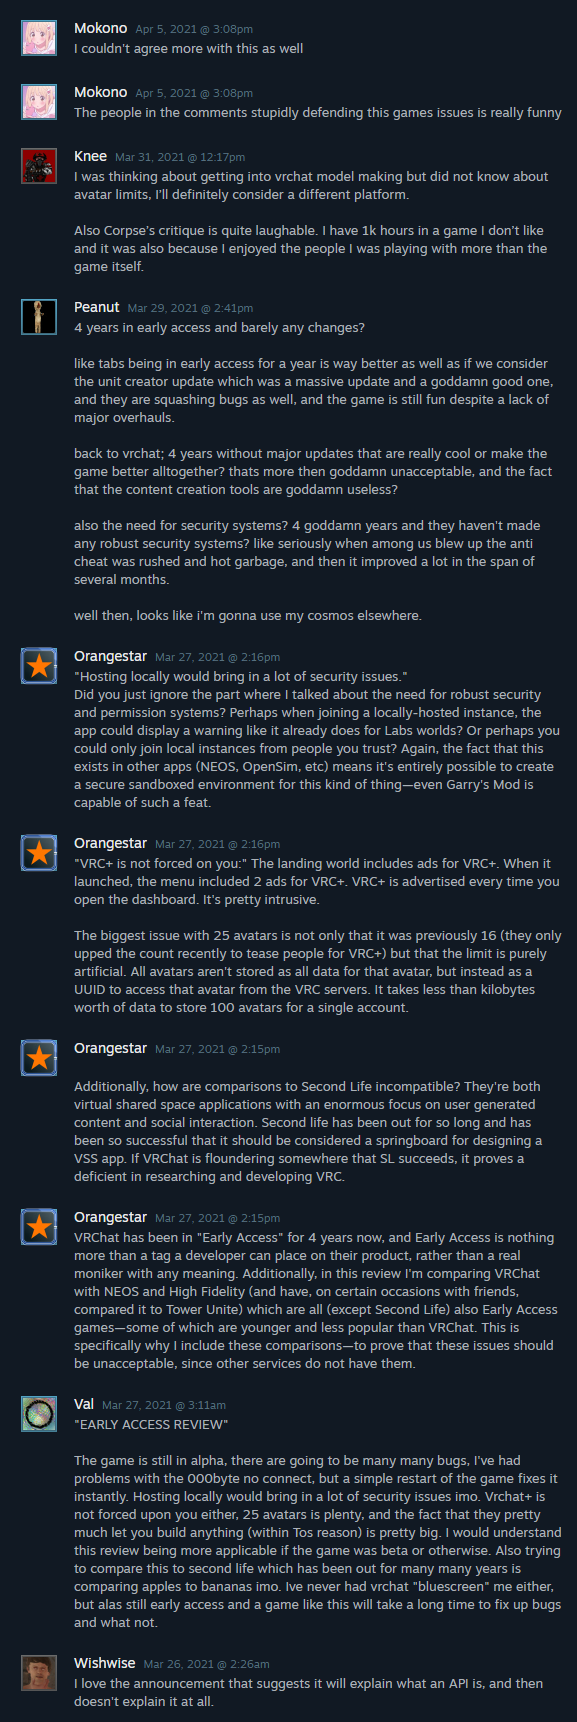 Aight, listen, this is a whole Steam comment thread. I ain't making alt text for the whole thing.